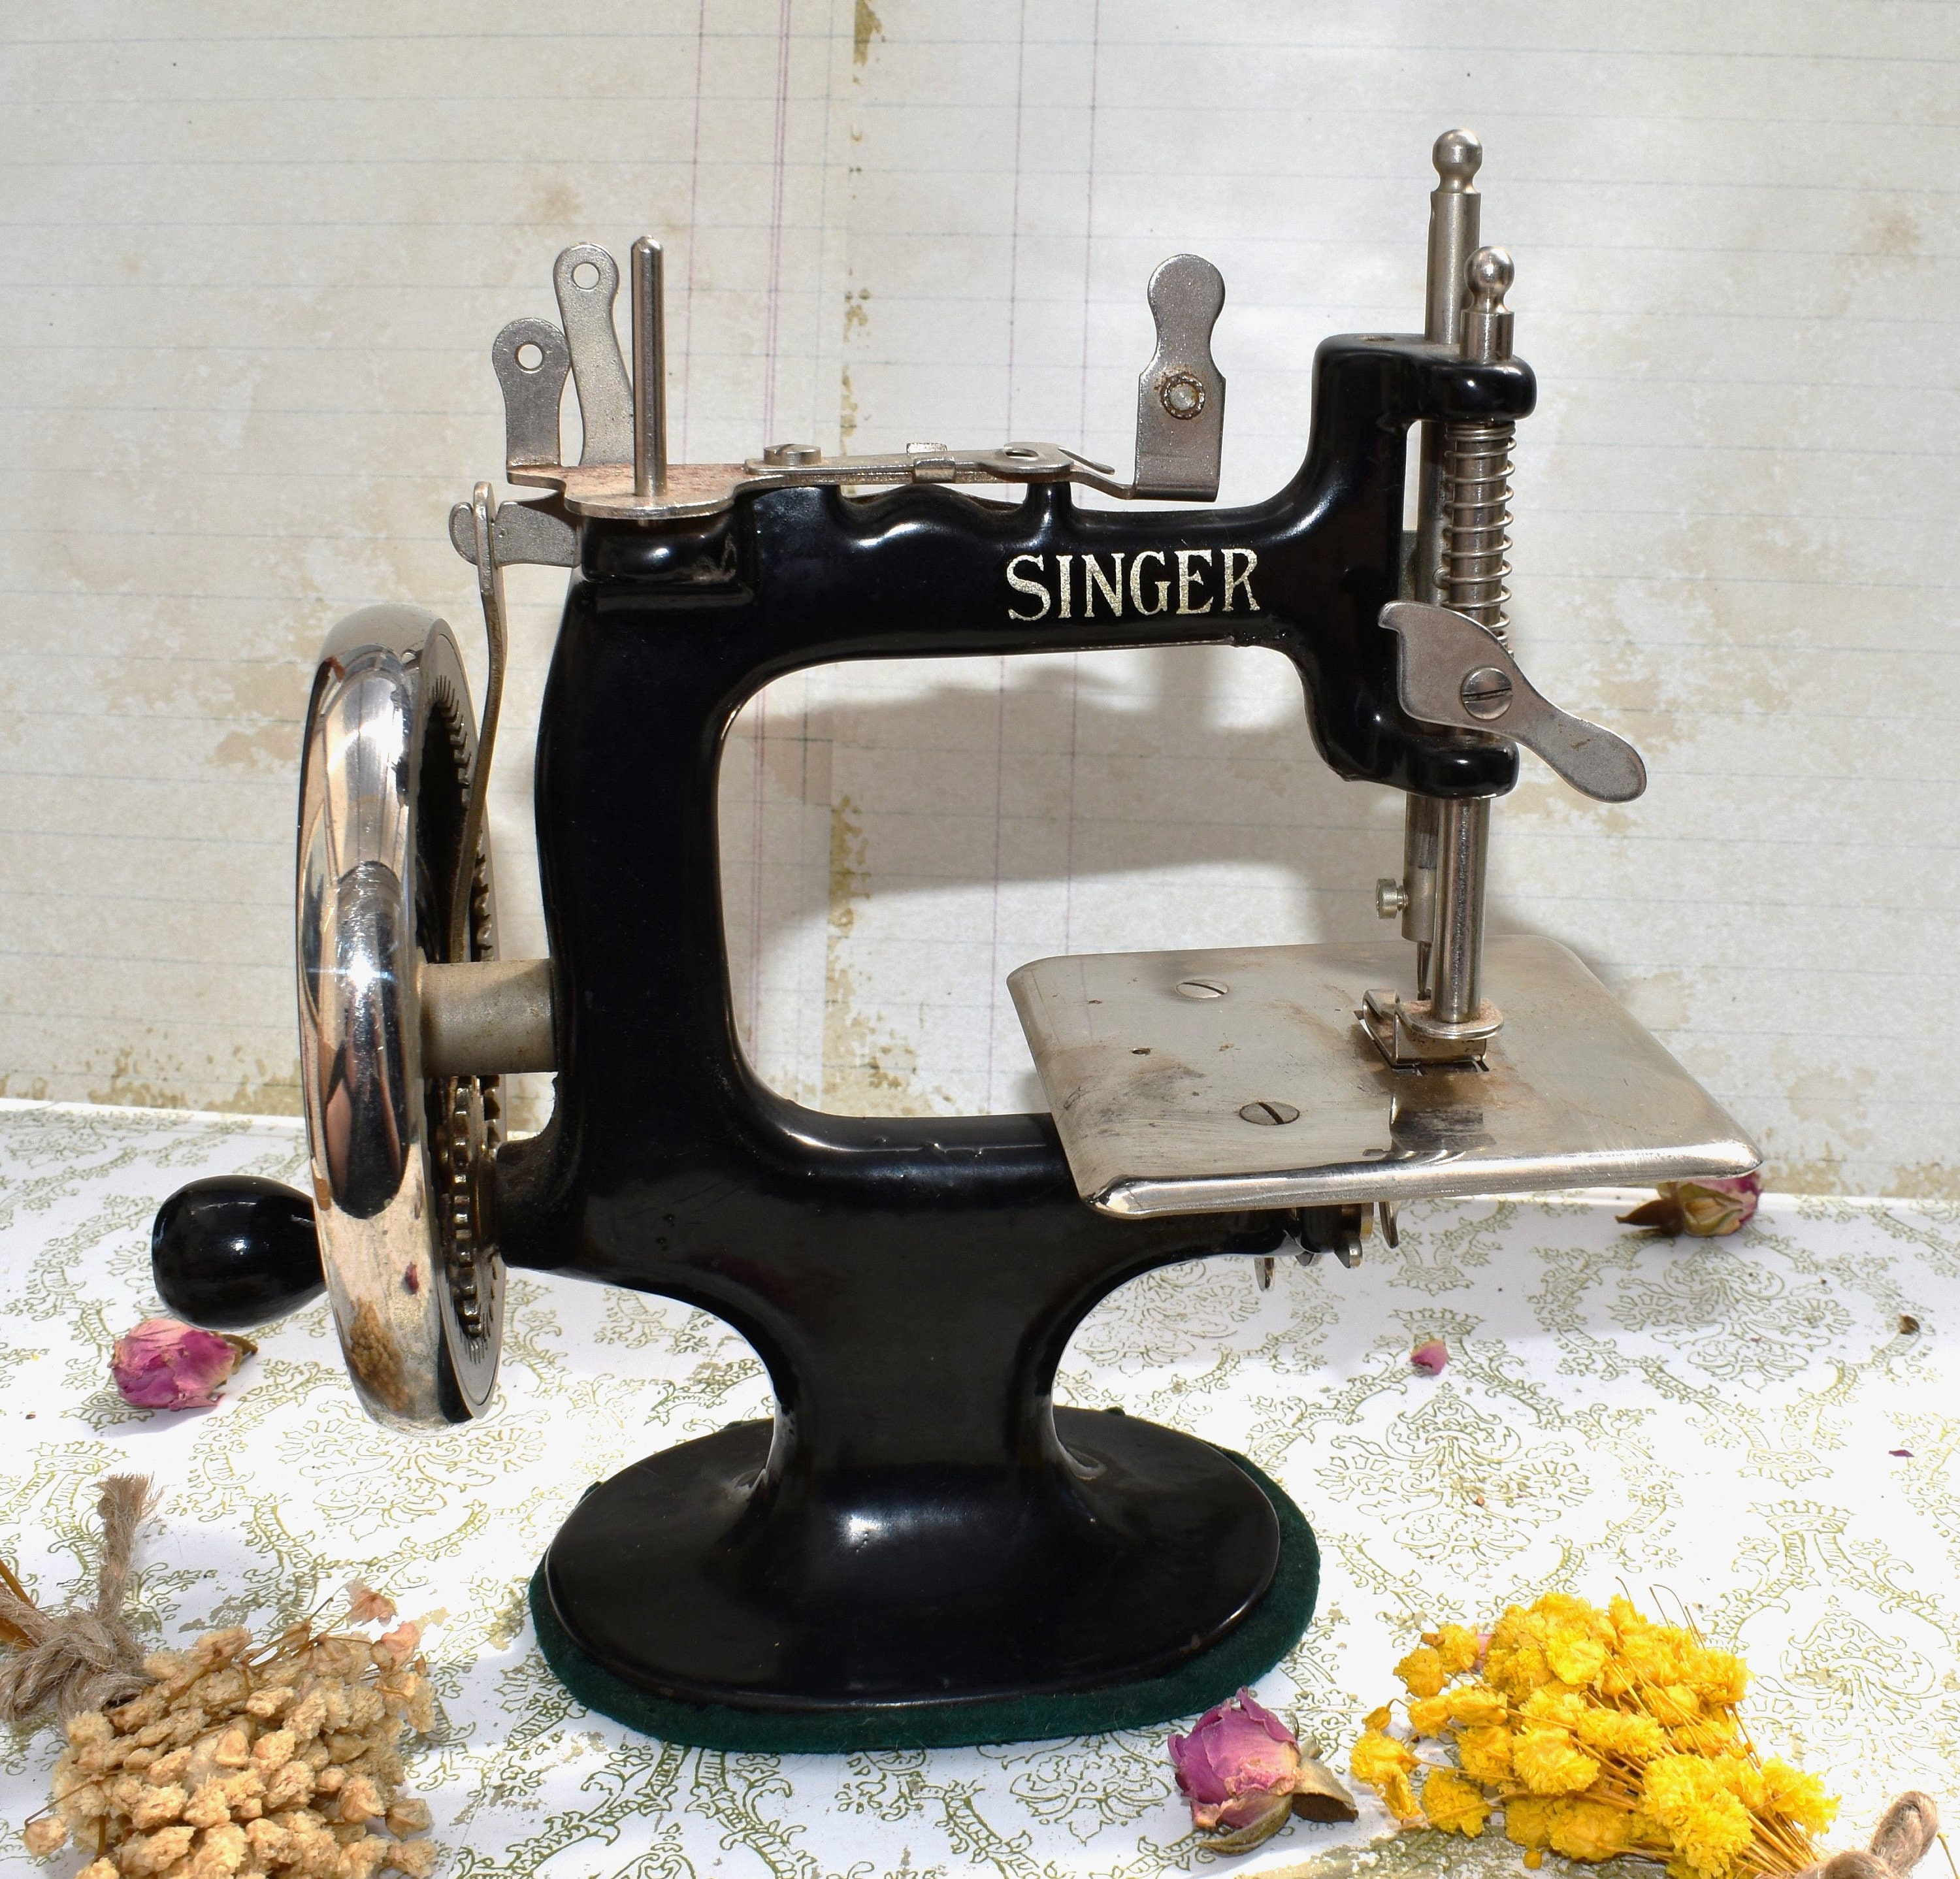 Small-Scale 20th Century Design: The Singer Sewing Machine - Packard  Proving Grounds Historic Site